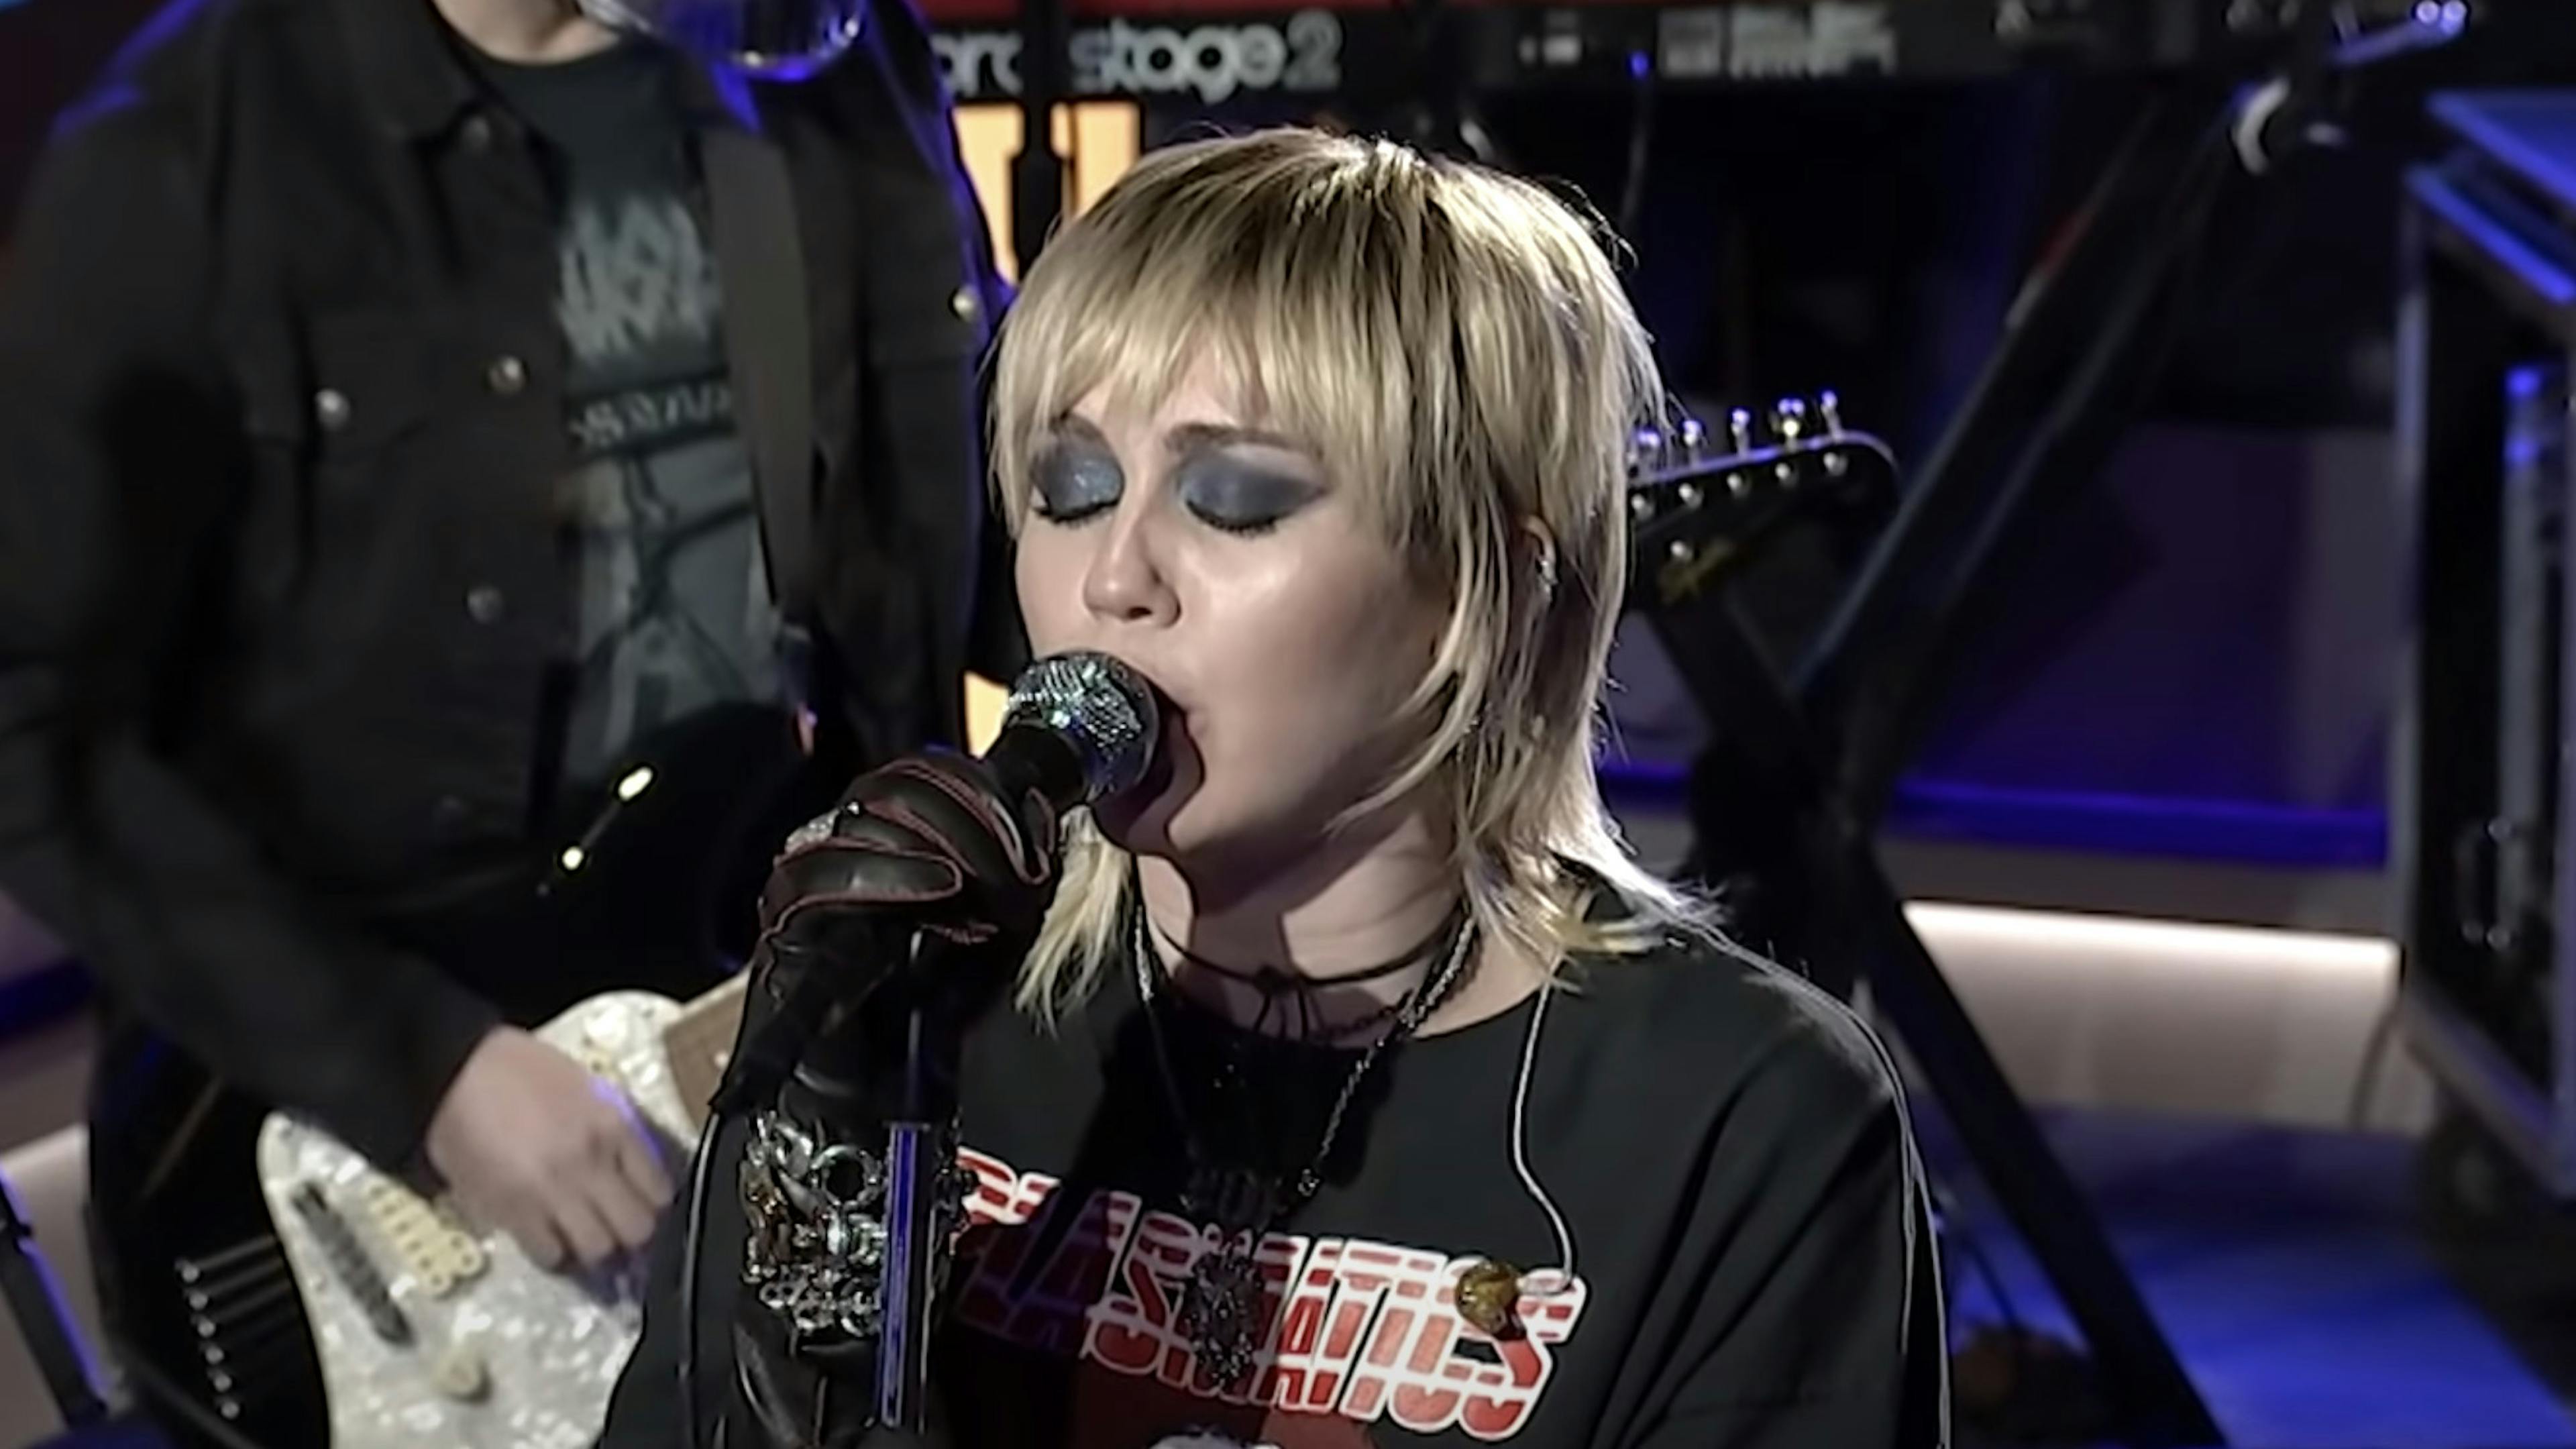 Courtney Love praises Miley Cyrus' cover of Hole’s Doll Parts: "I'm touched"